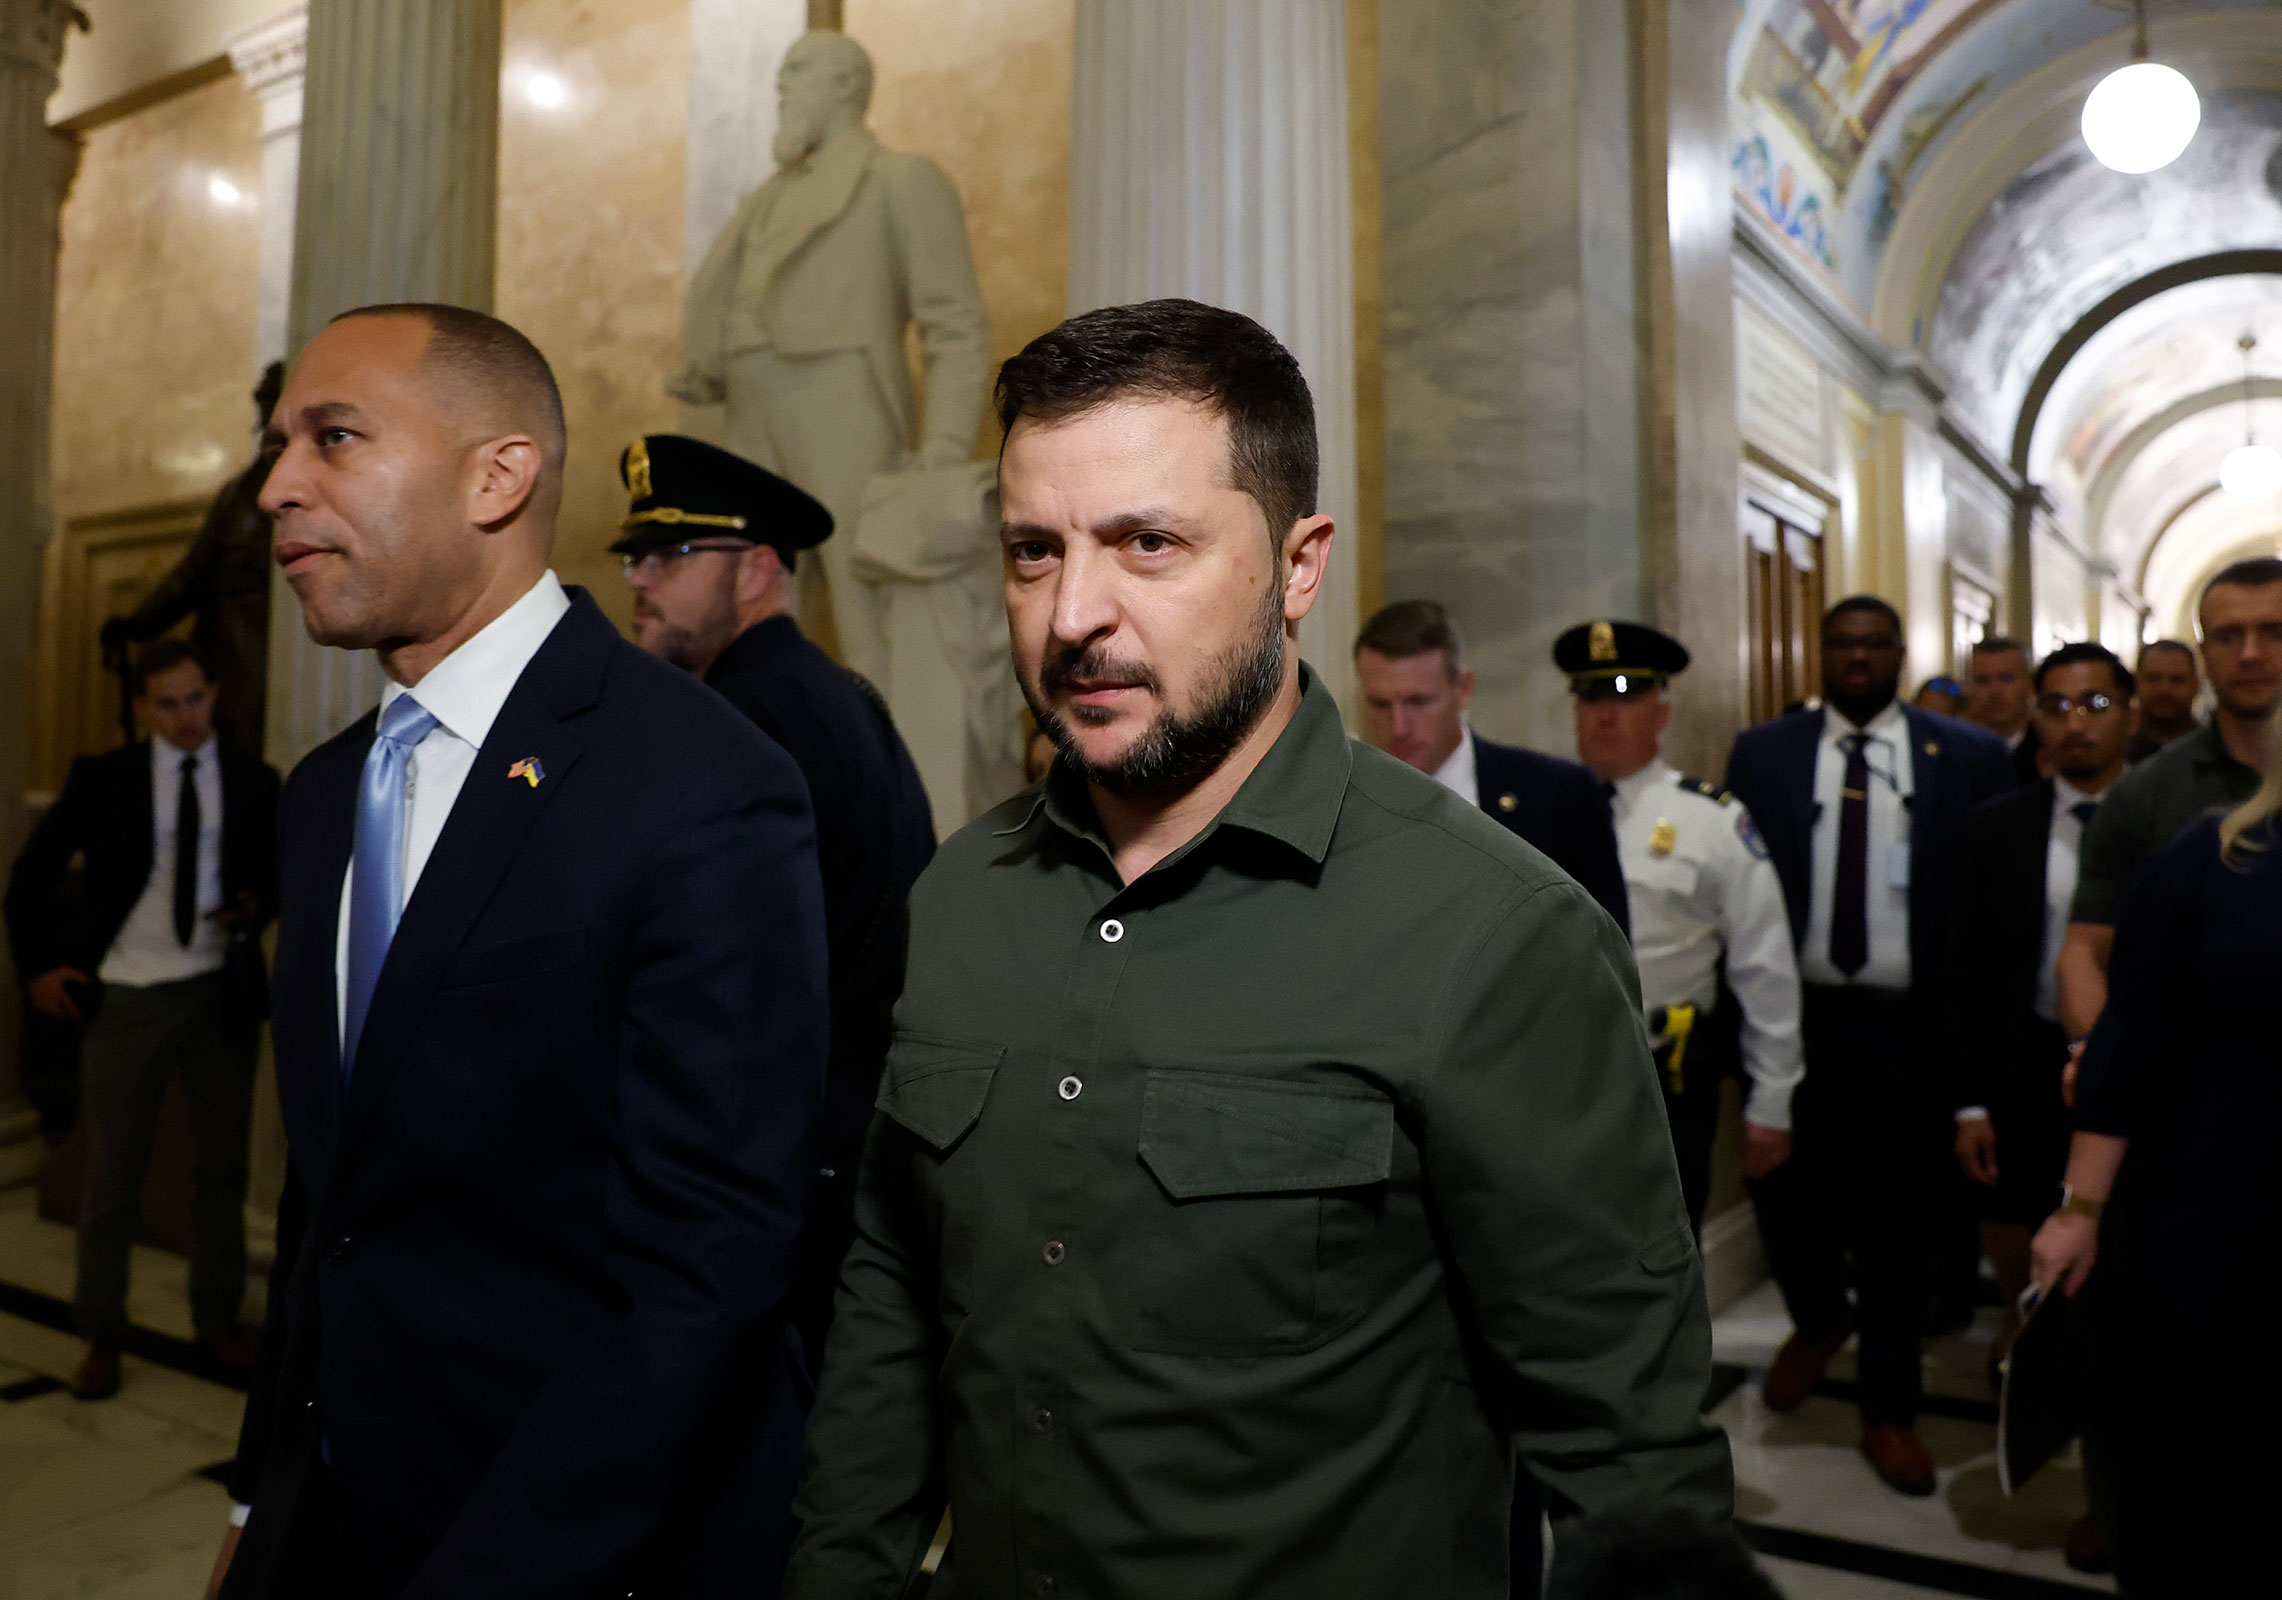 President of Ukraine Volodymyr Zelensky walks with Minority Leader Rep. Hakeem Jeffries as he arrives for a meeting with members of the U.S. House of Representatives at the U.S. Capitol on September 21, 2023 in Washington, DC.